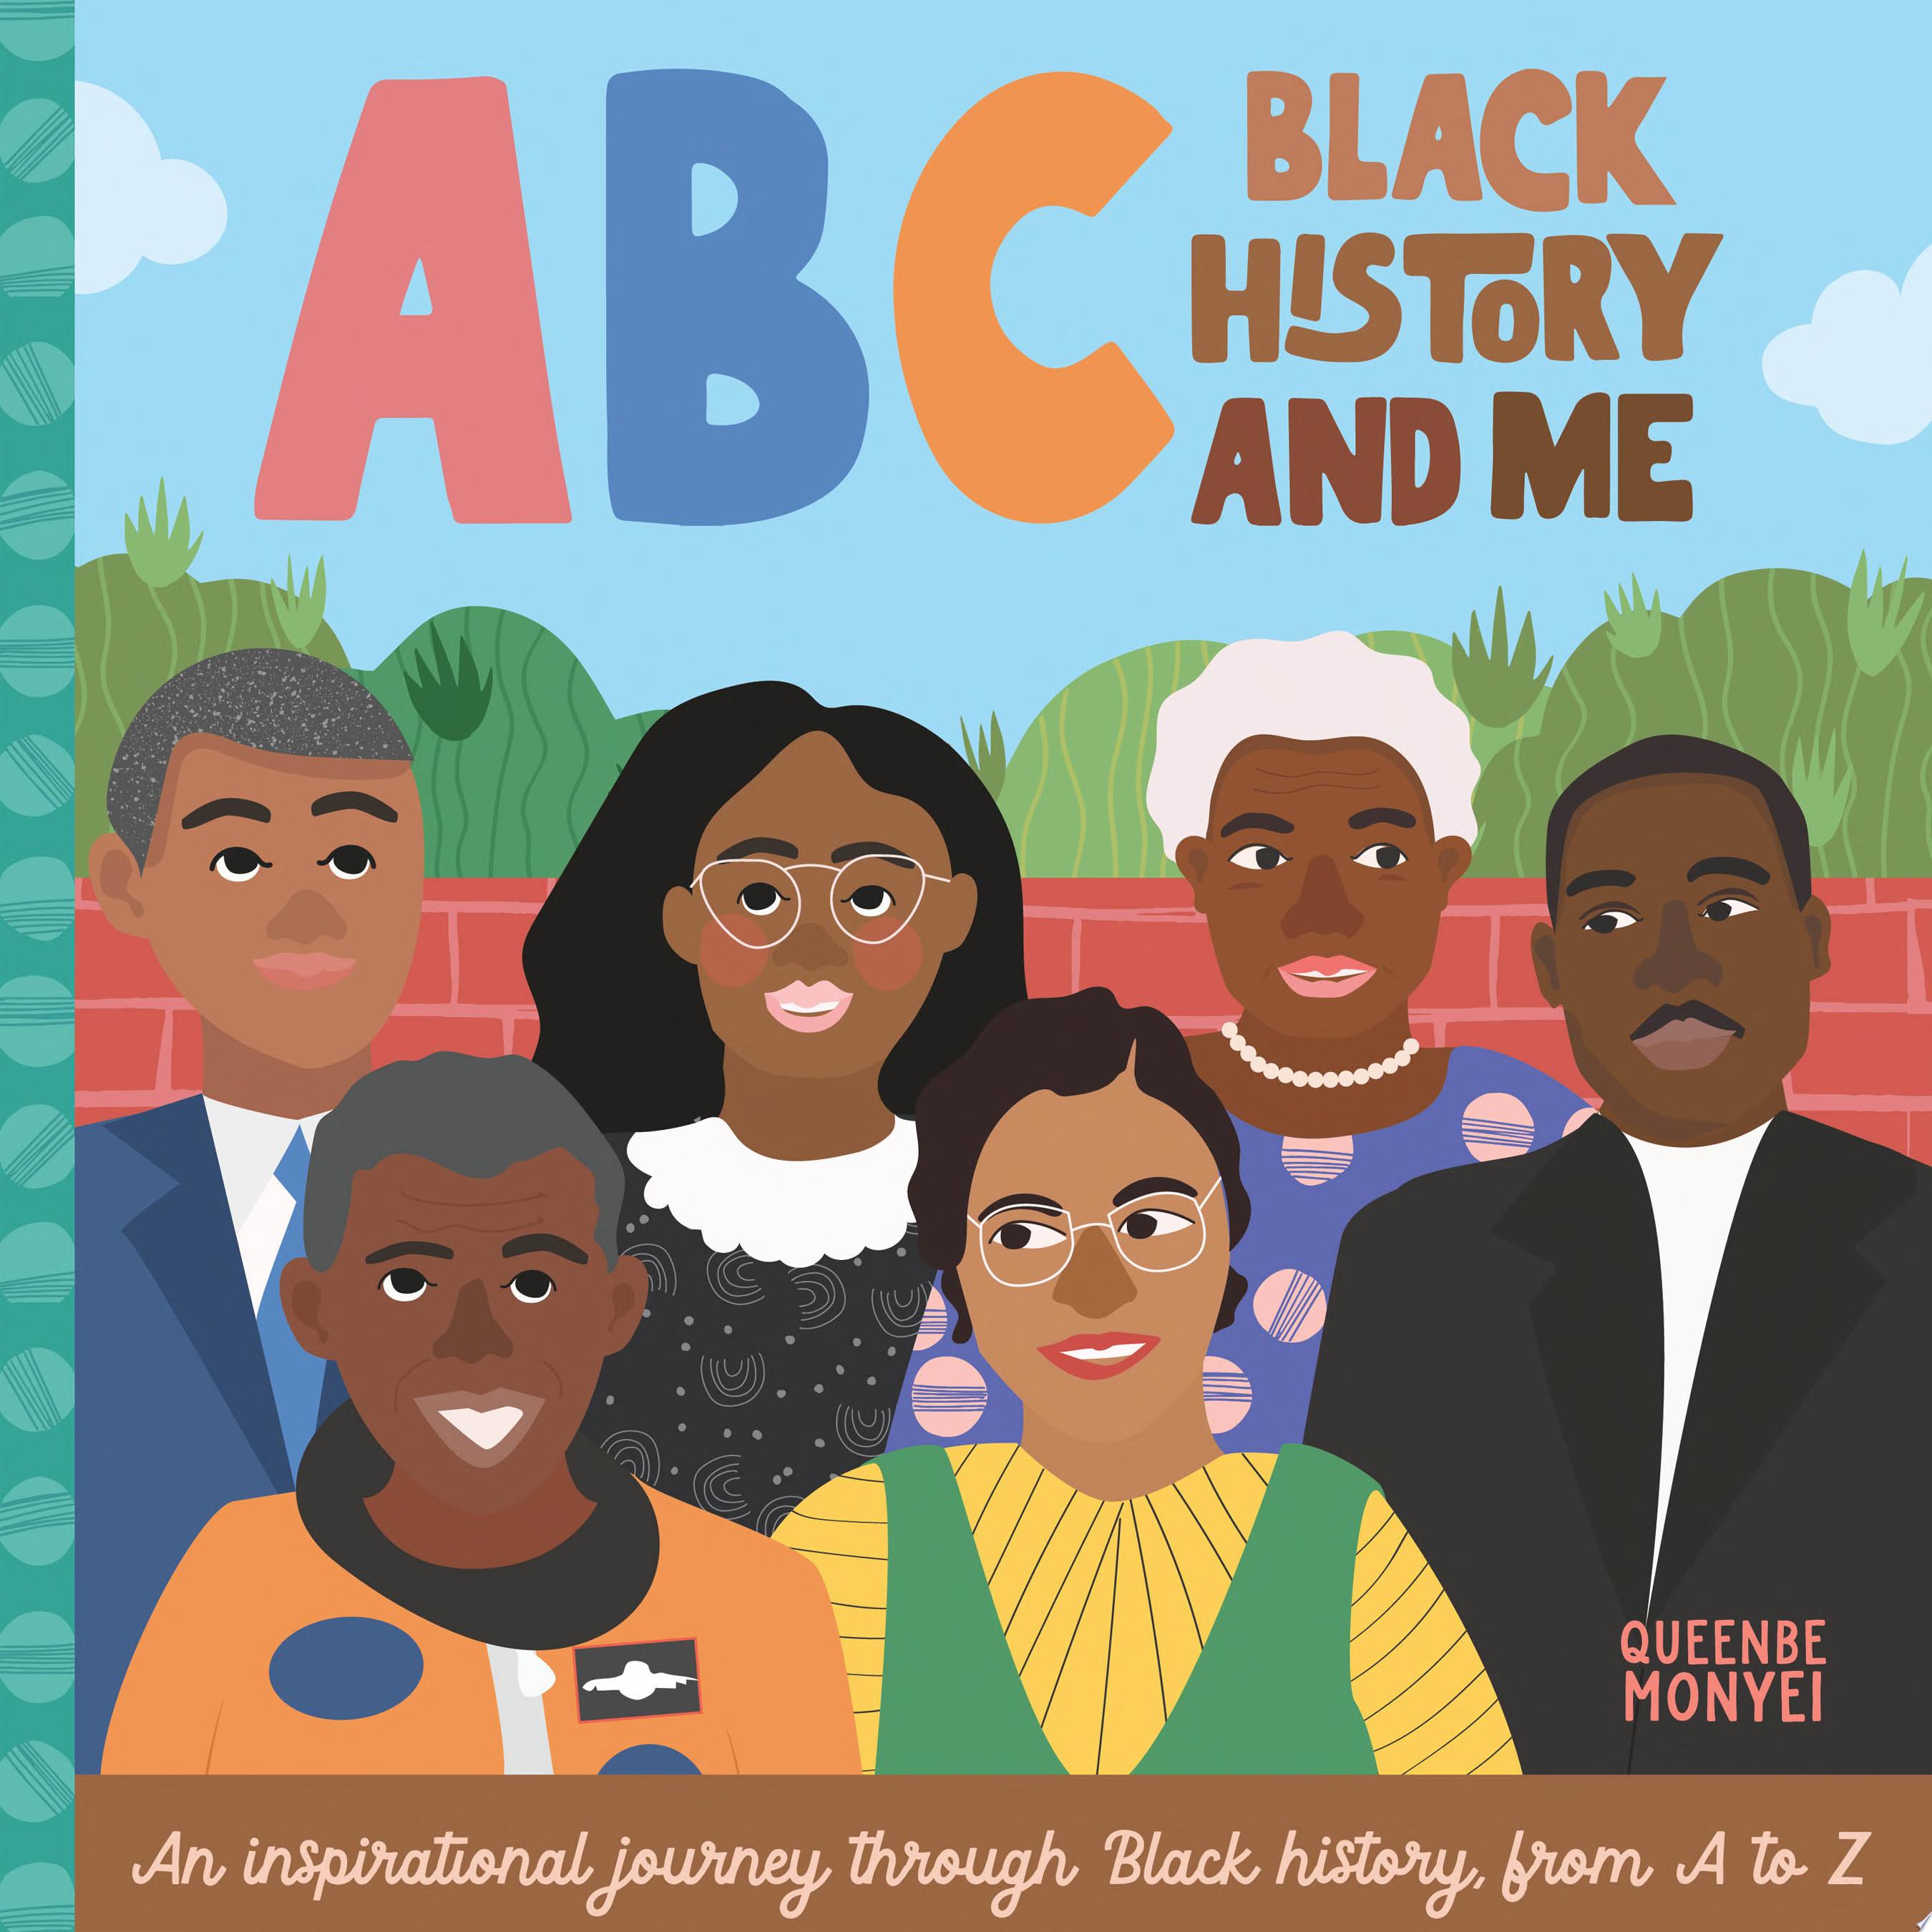 Image for "ABC Black History and Me"